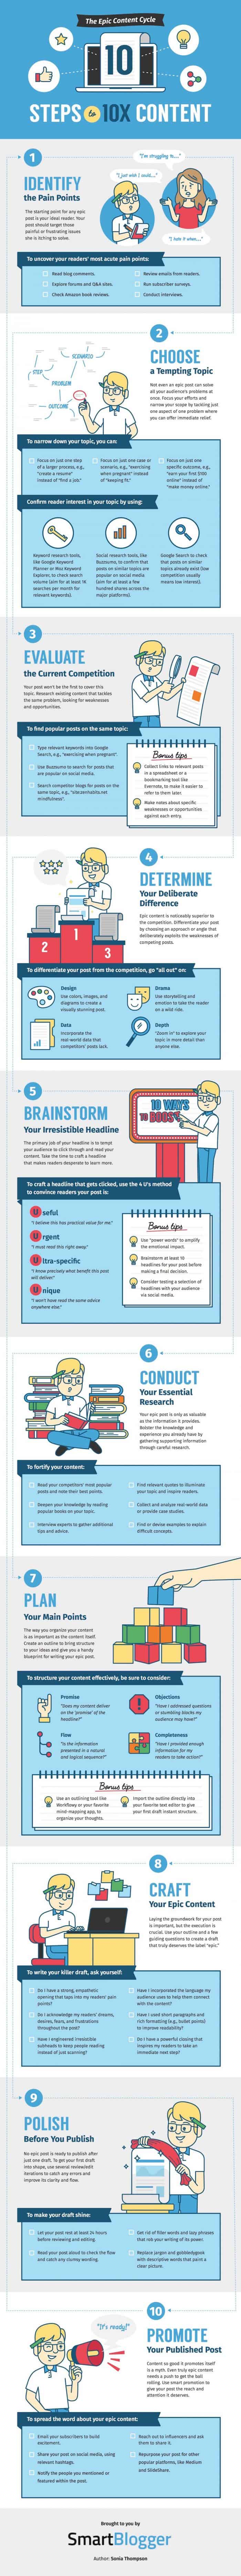 make epic content infographic